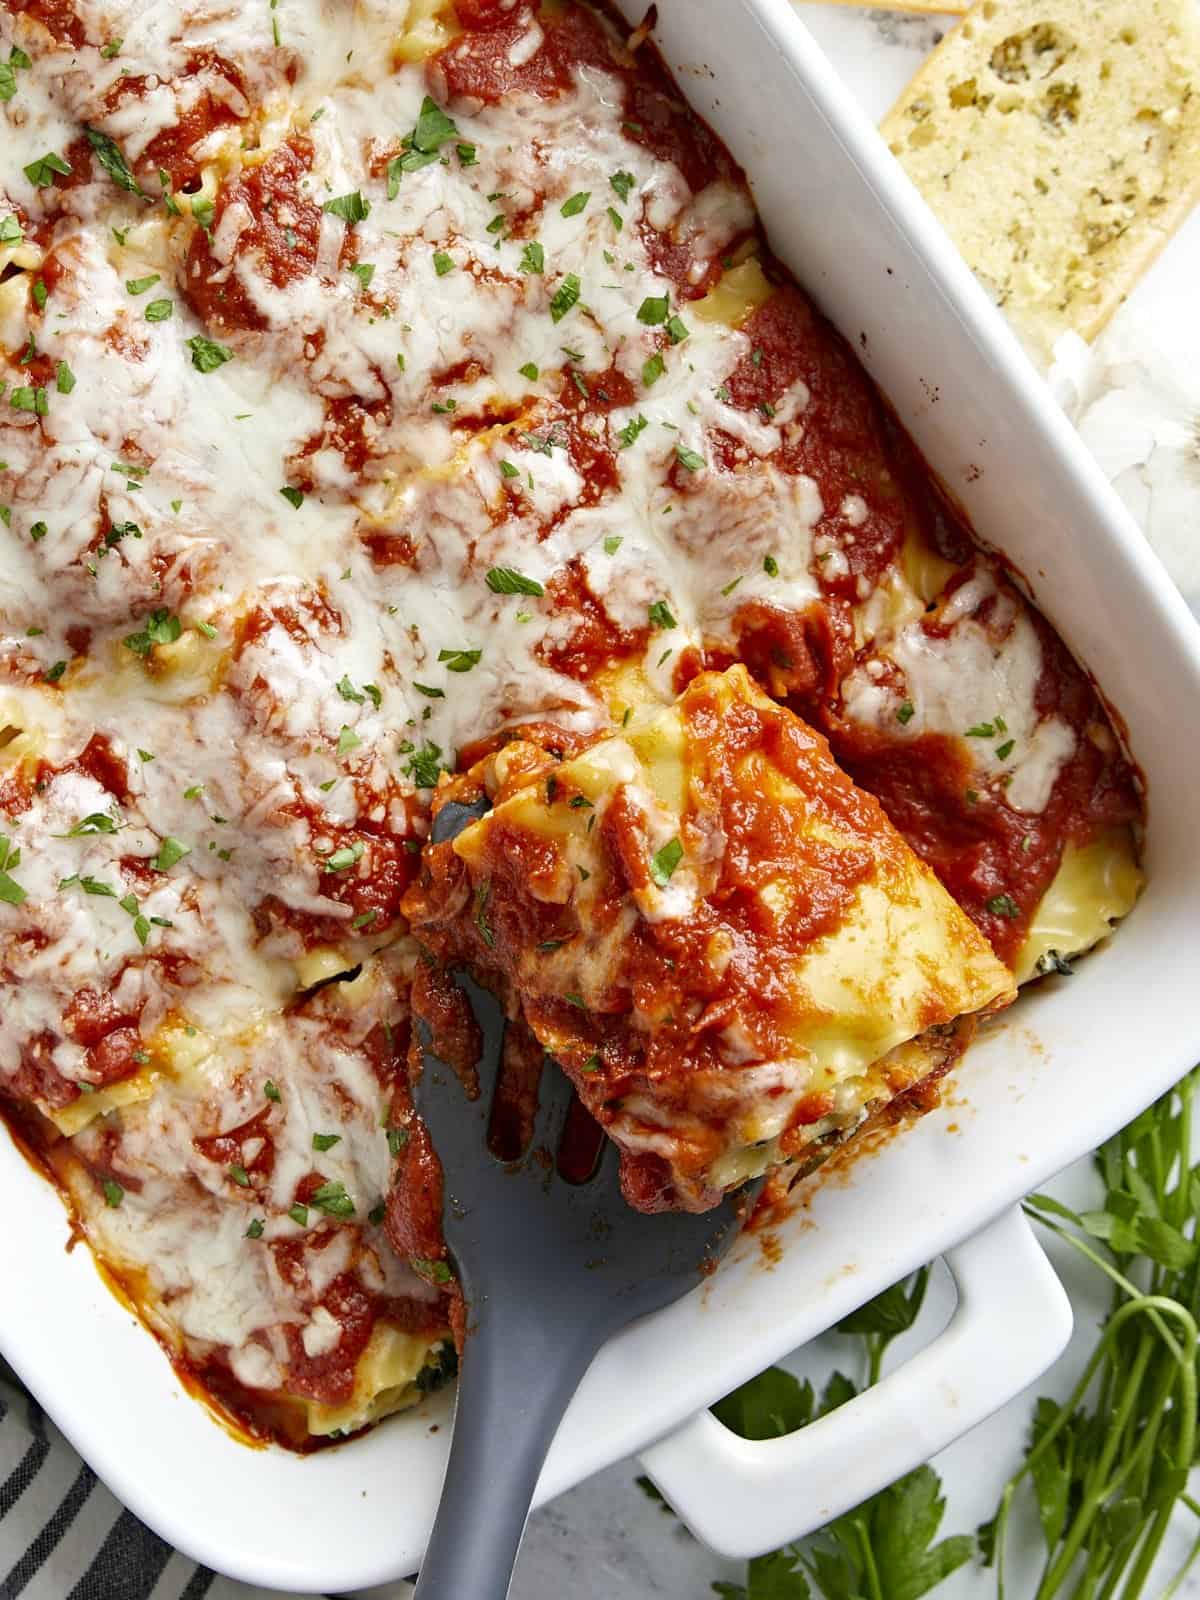 Overhead view of a lasagna roll up being lifted from the baking dish.